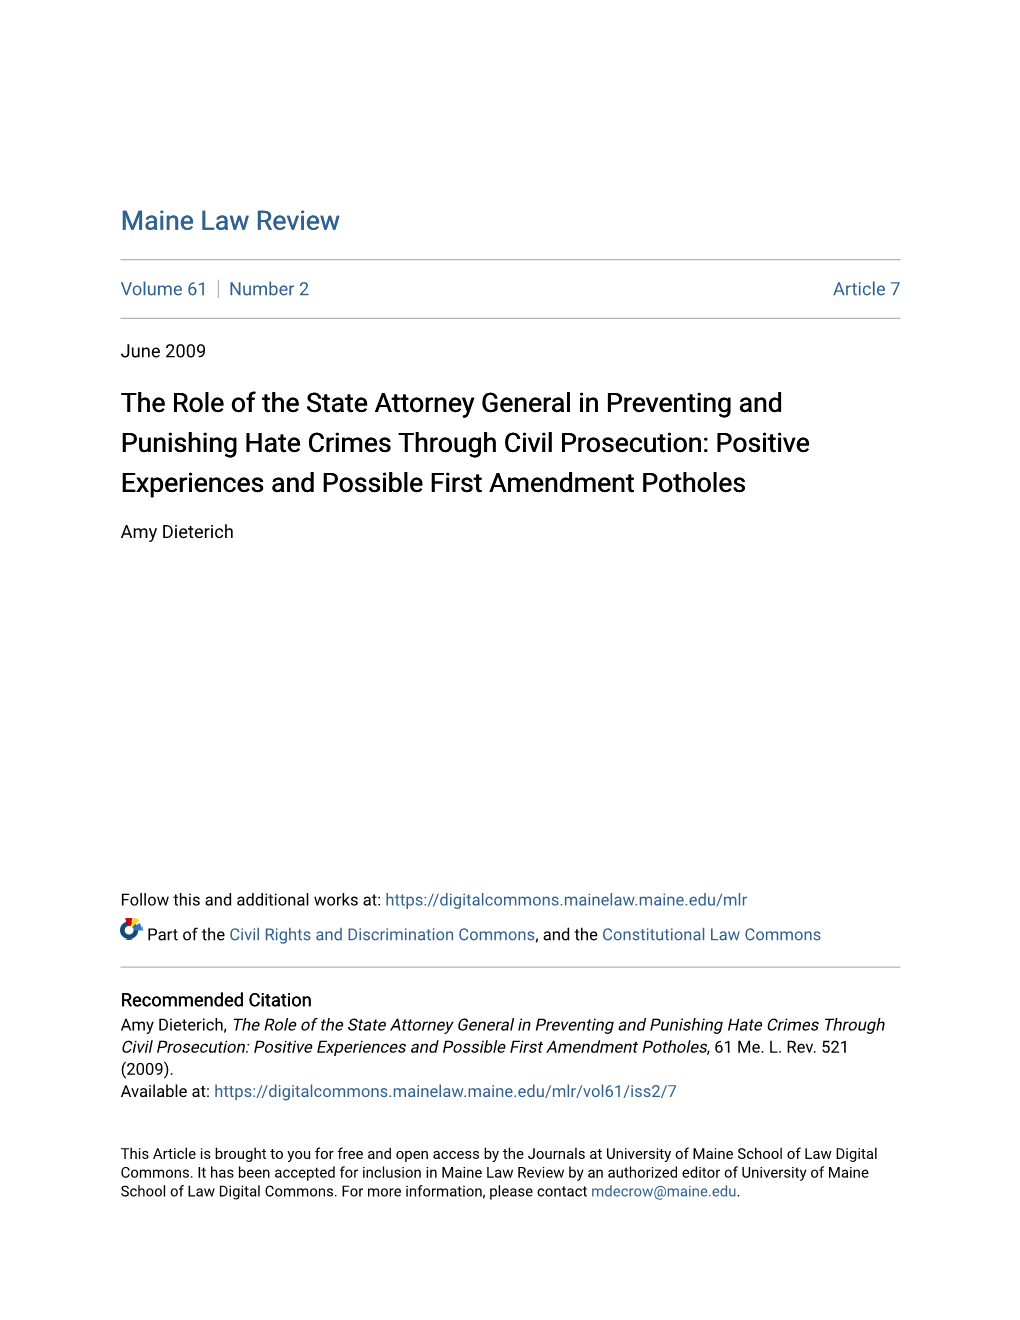 The Role of the State Attorney General in Preventing and Punishing Hate Crimes Through Civil Prosecution: Positive Experiences and Possible First Amendment Potholes